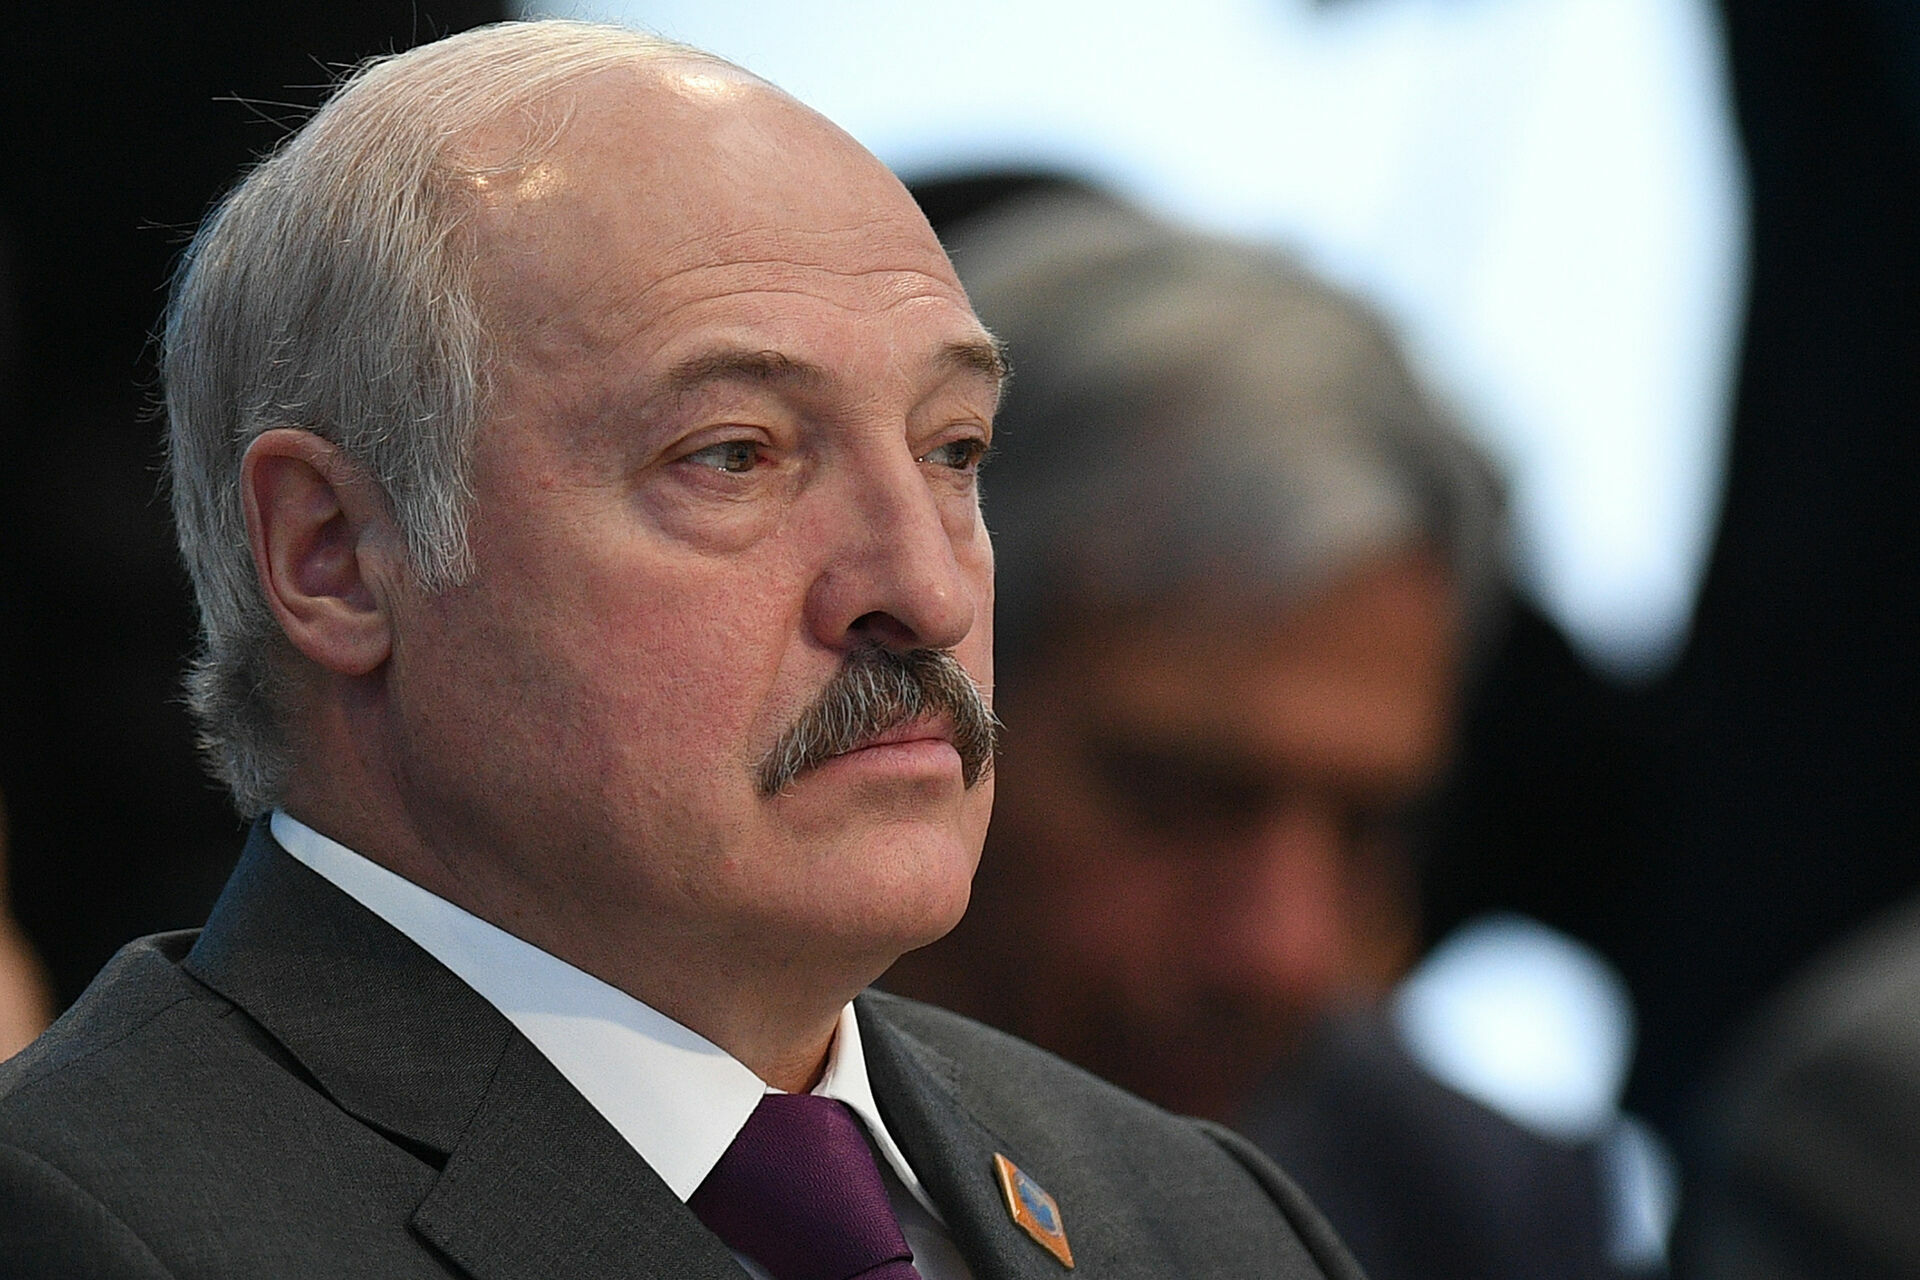 Lukashenko appealed for new elections "if someone doesn't like him"